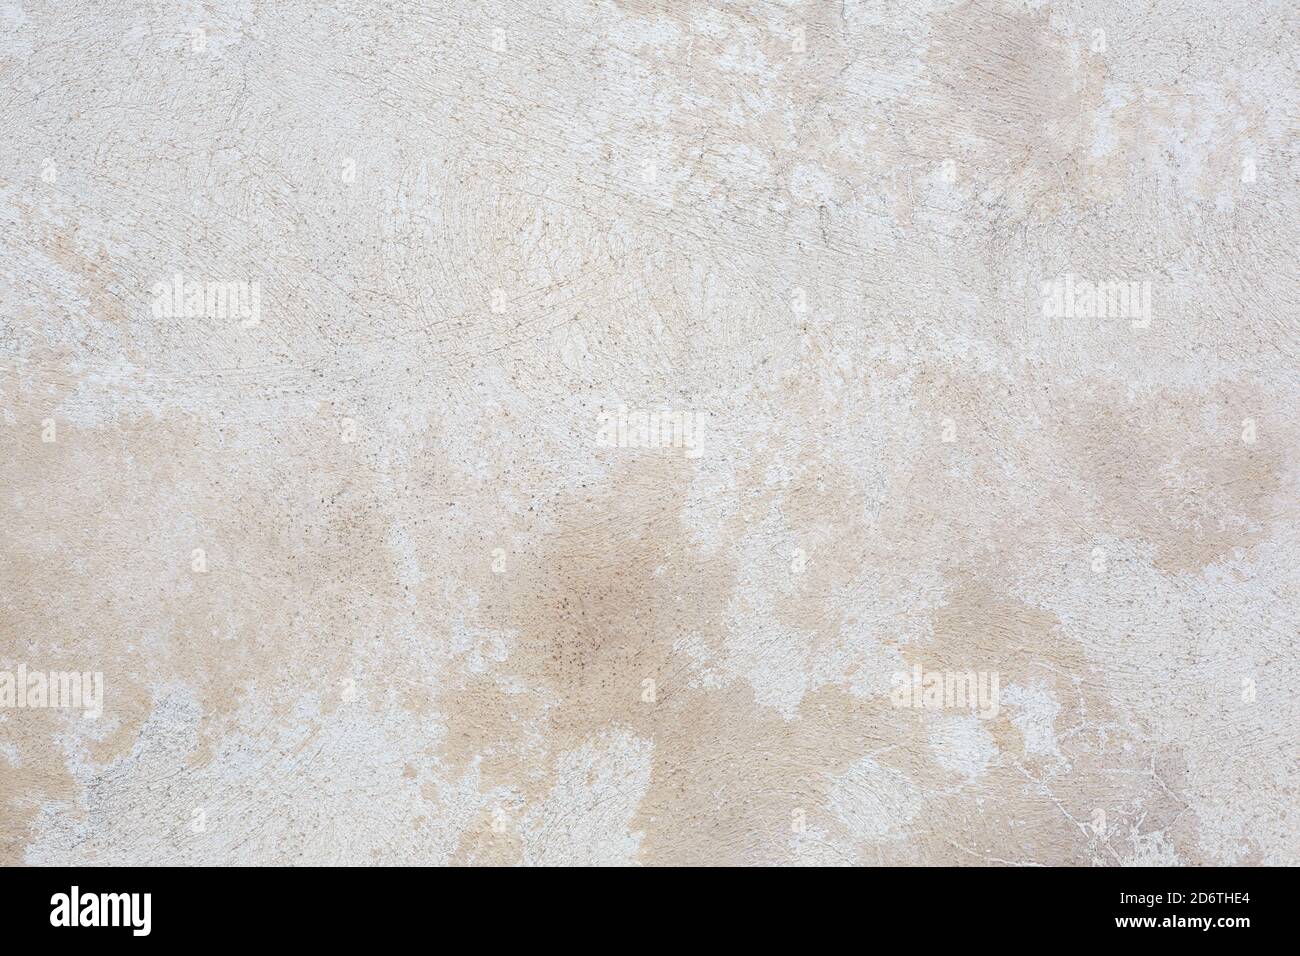 White and beige cement wall, concrete texture background Stock Photo